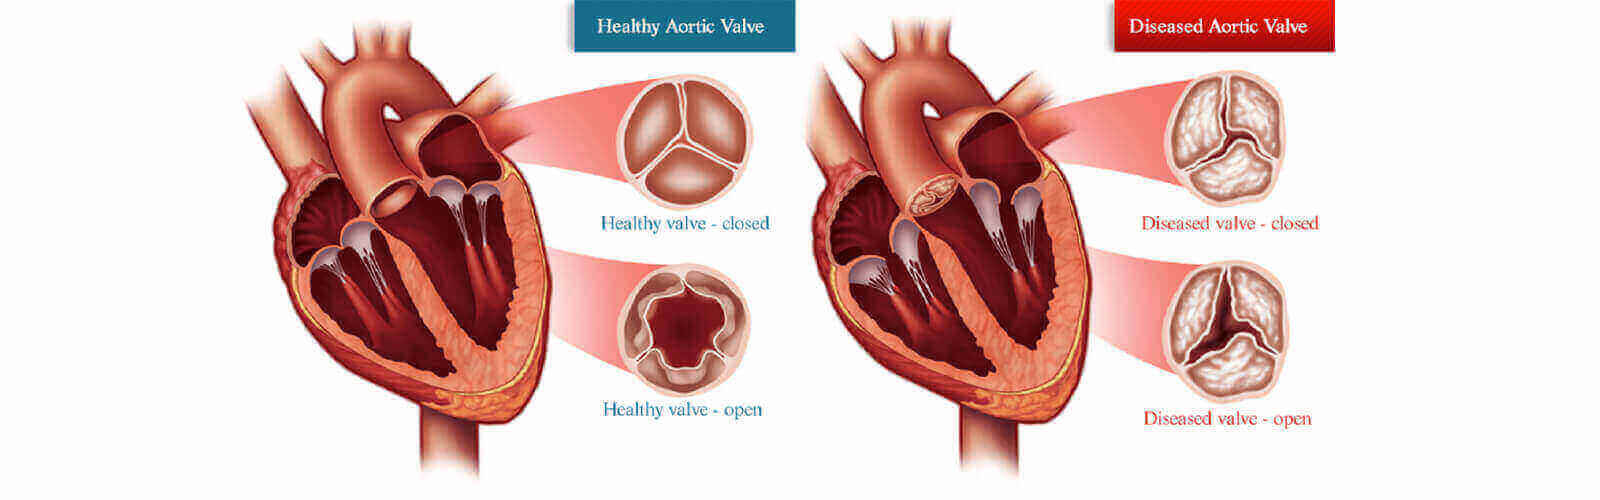 Heart Valve Replacement Surgery in Sutton